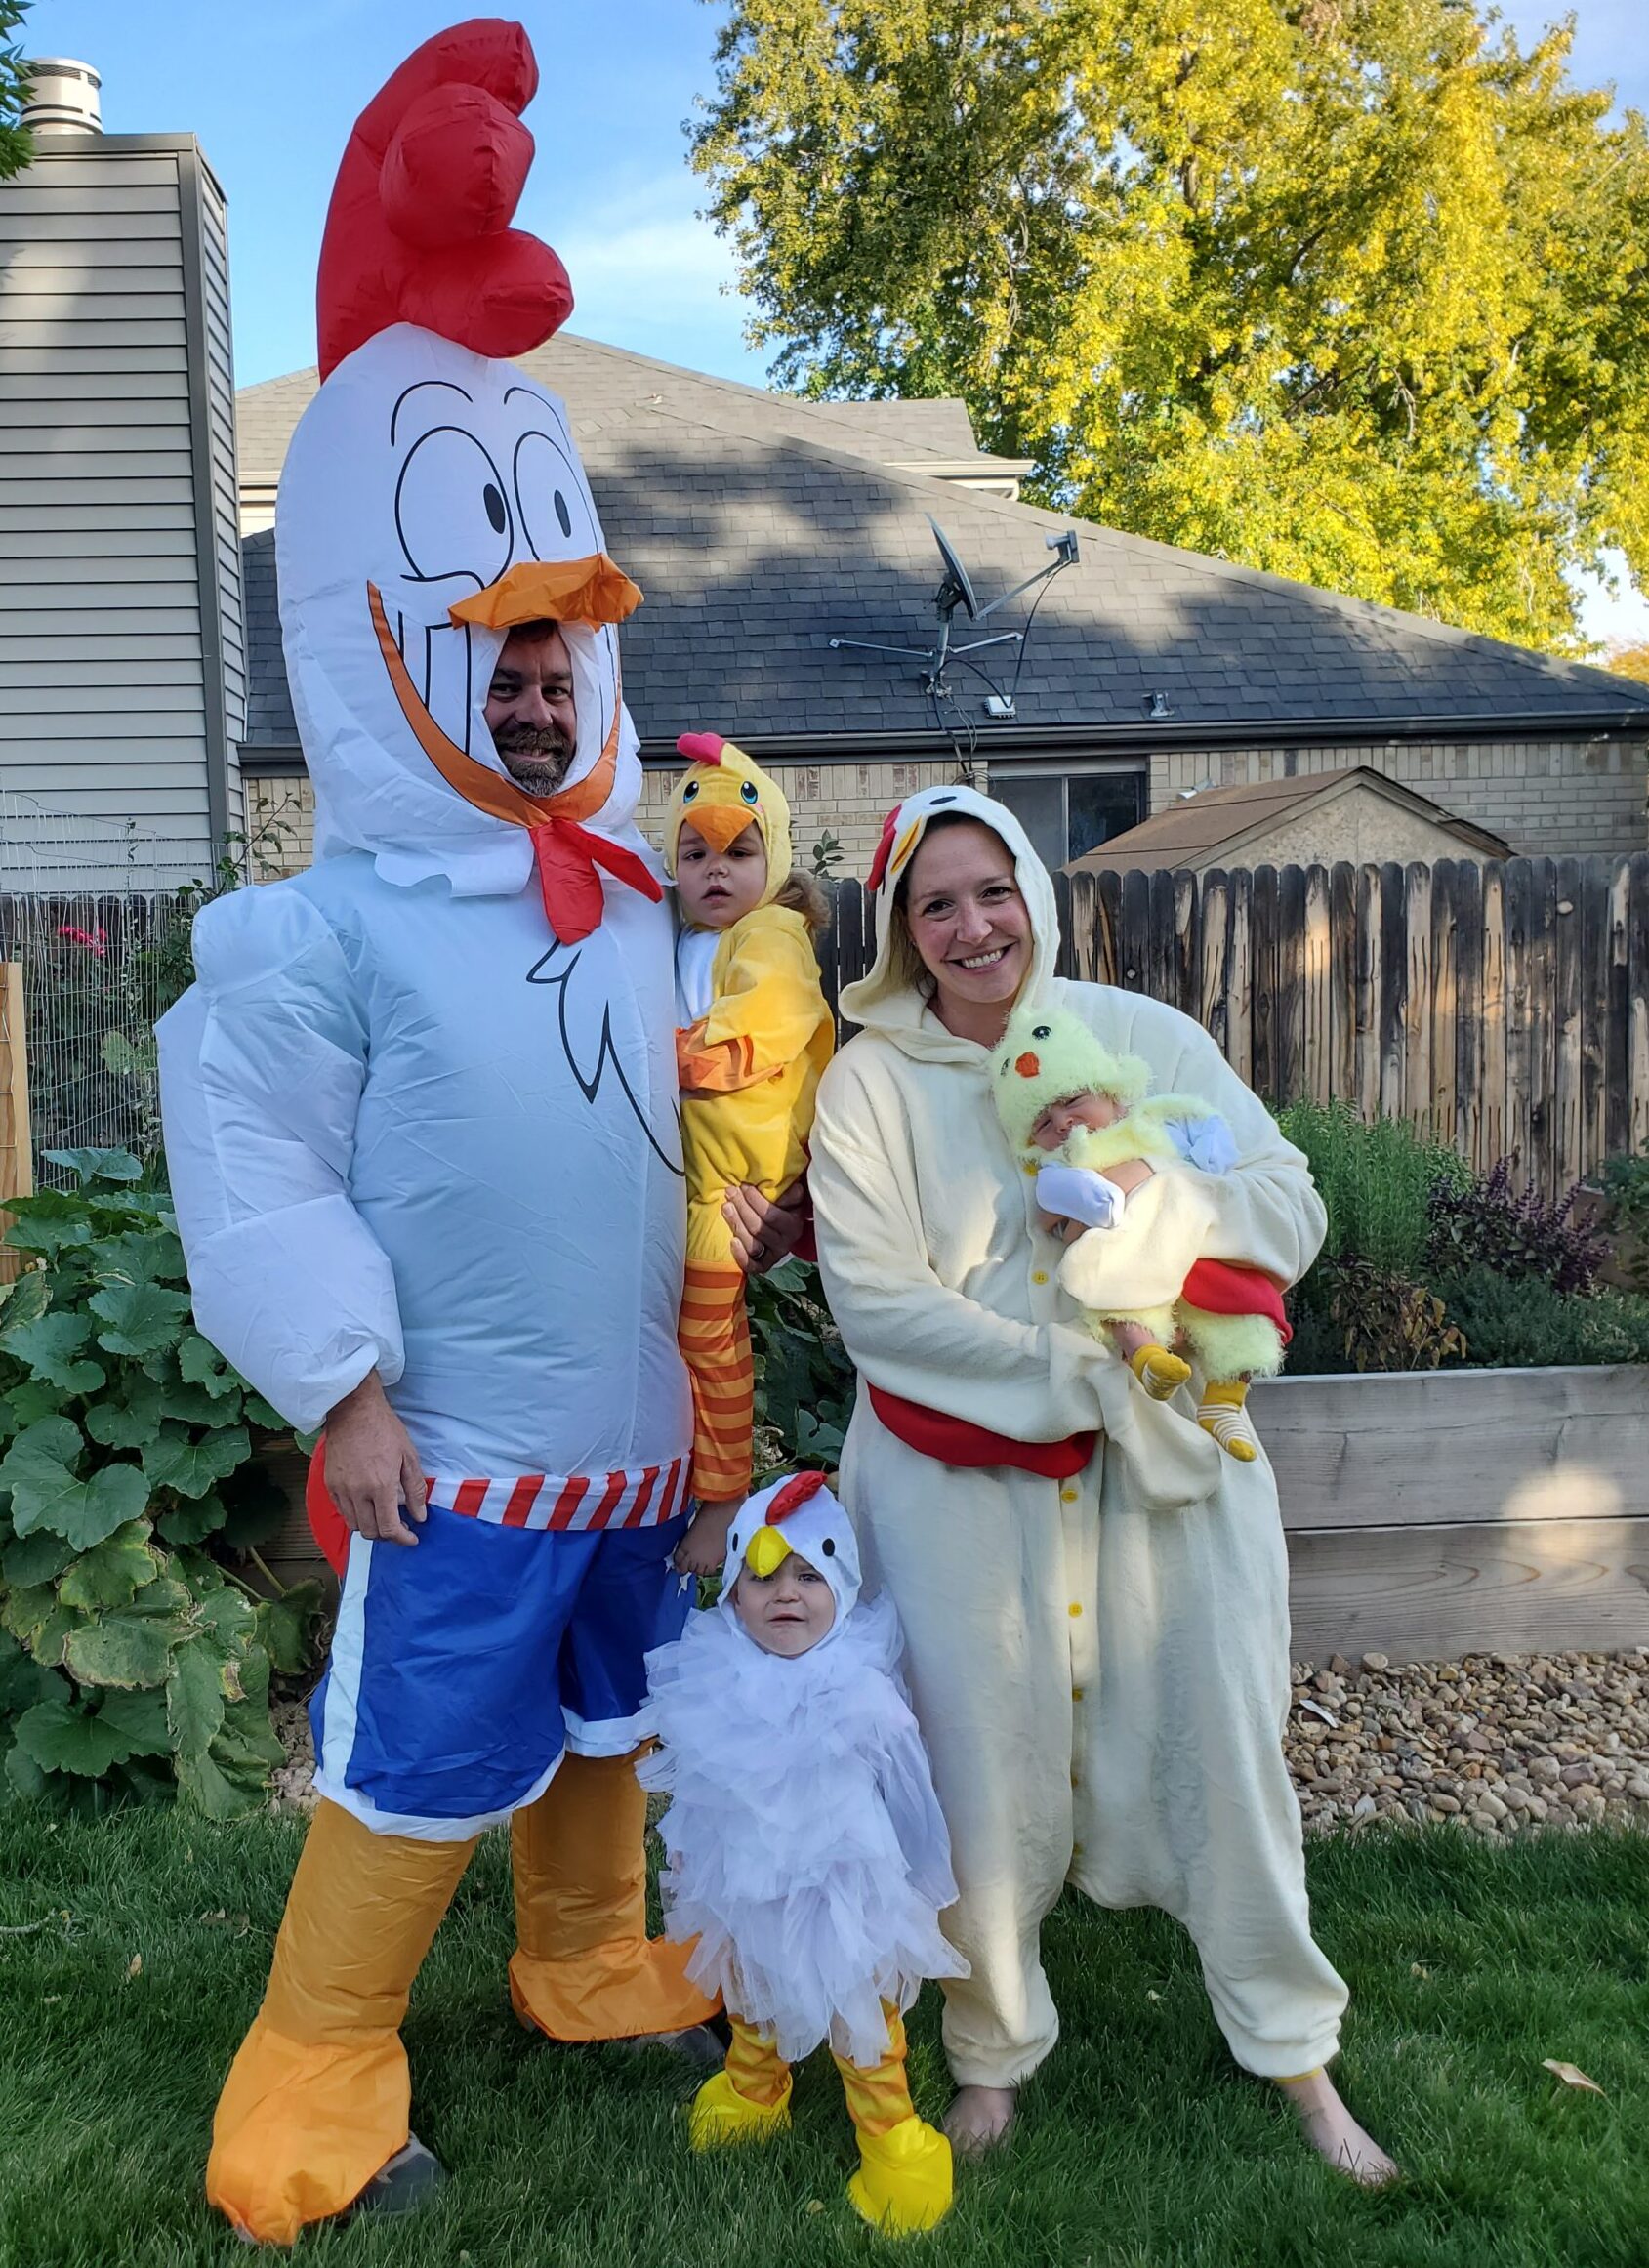 Two adults and three children. One adult and one child are in a white body outfit, red feathers on head and yellow beak and feet. The other adult and two of the children are all wearing yellow onesies, with red feathers on head and orange beak.